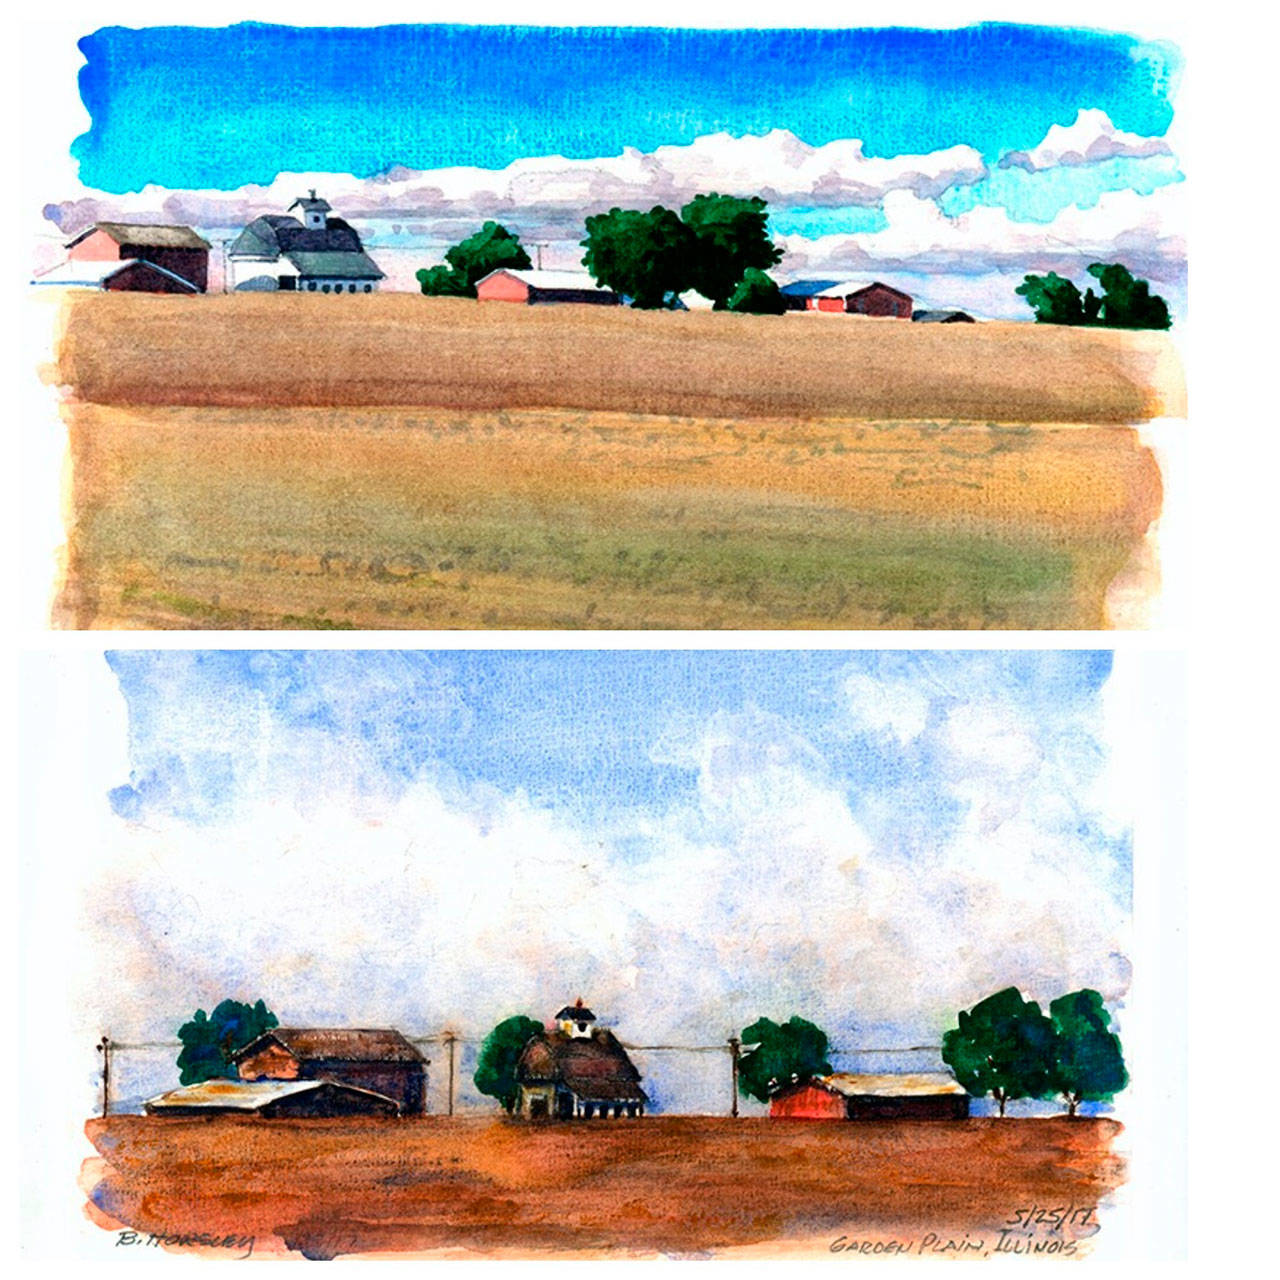 A scene in Garden Plain, Illinois, as painted by Bruce Morser (top) and Bob Horsley (bottom) on their cross-country bike trip this past summer. (Courtesy Photos)